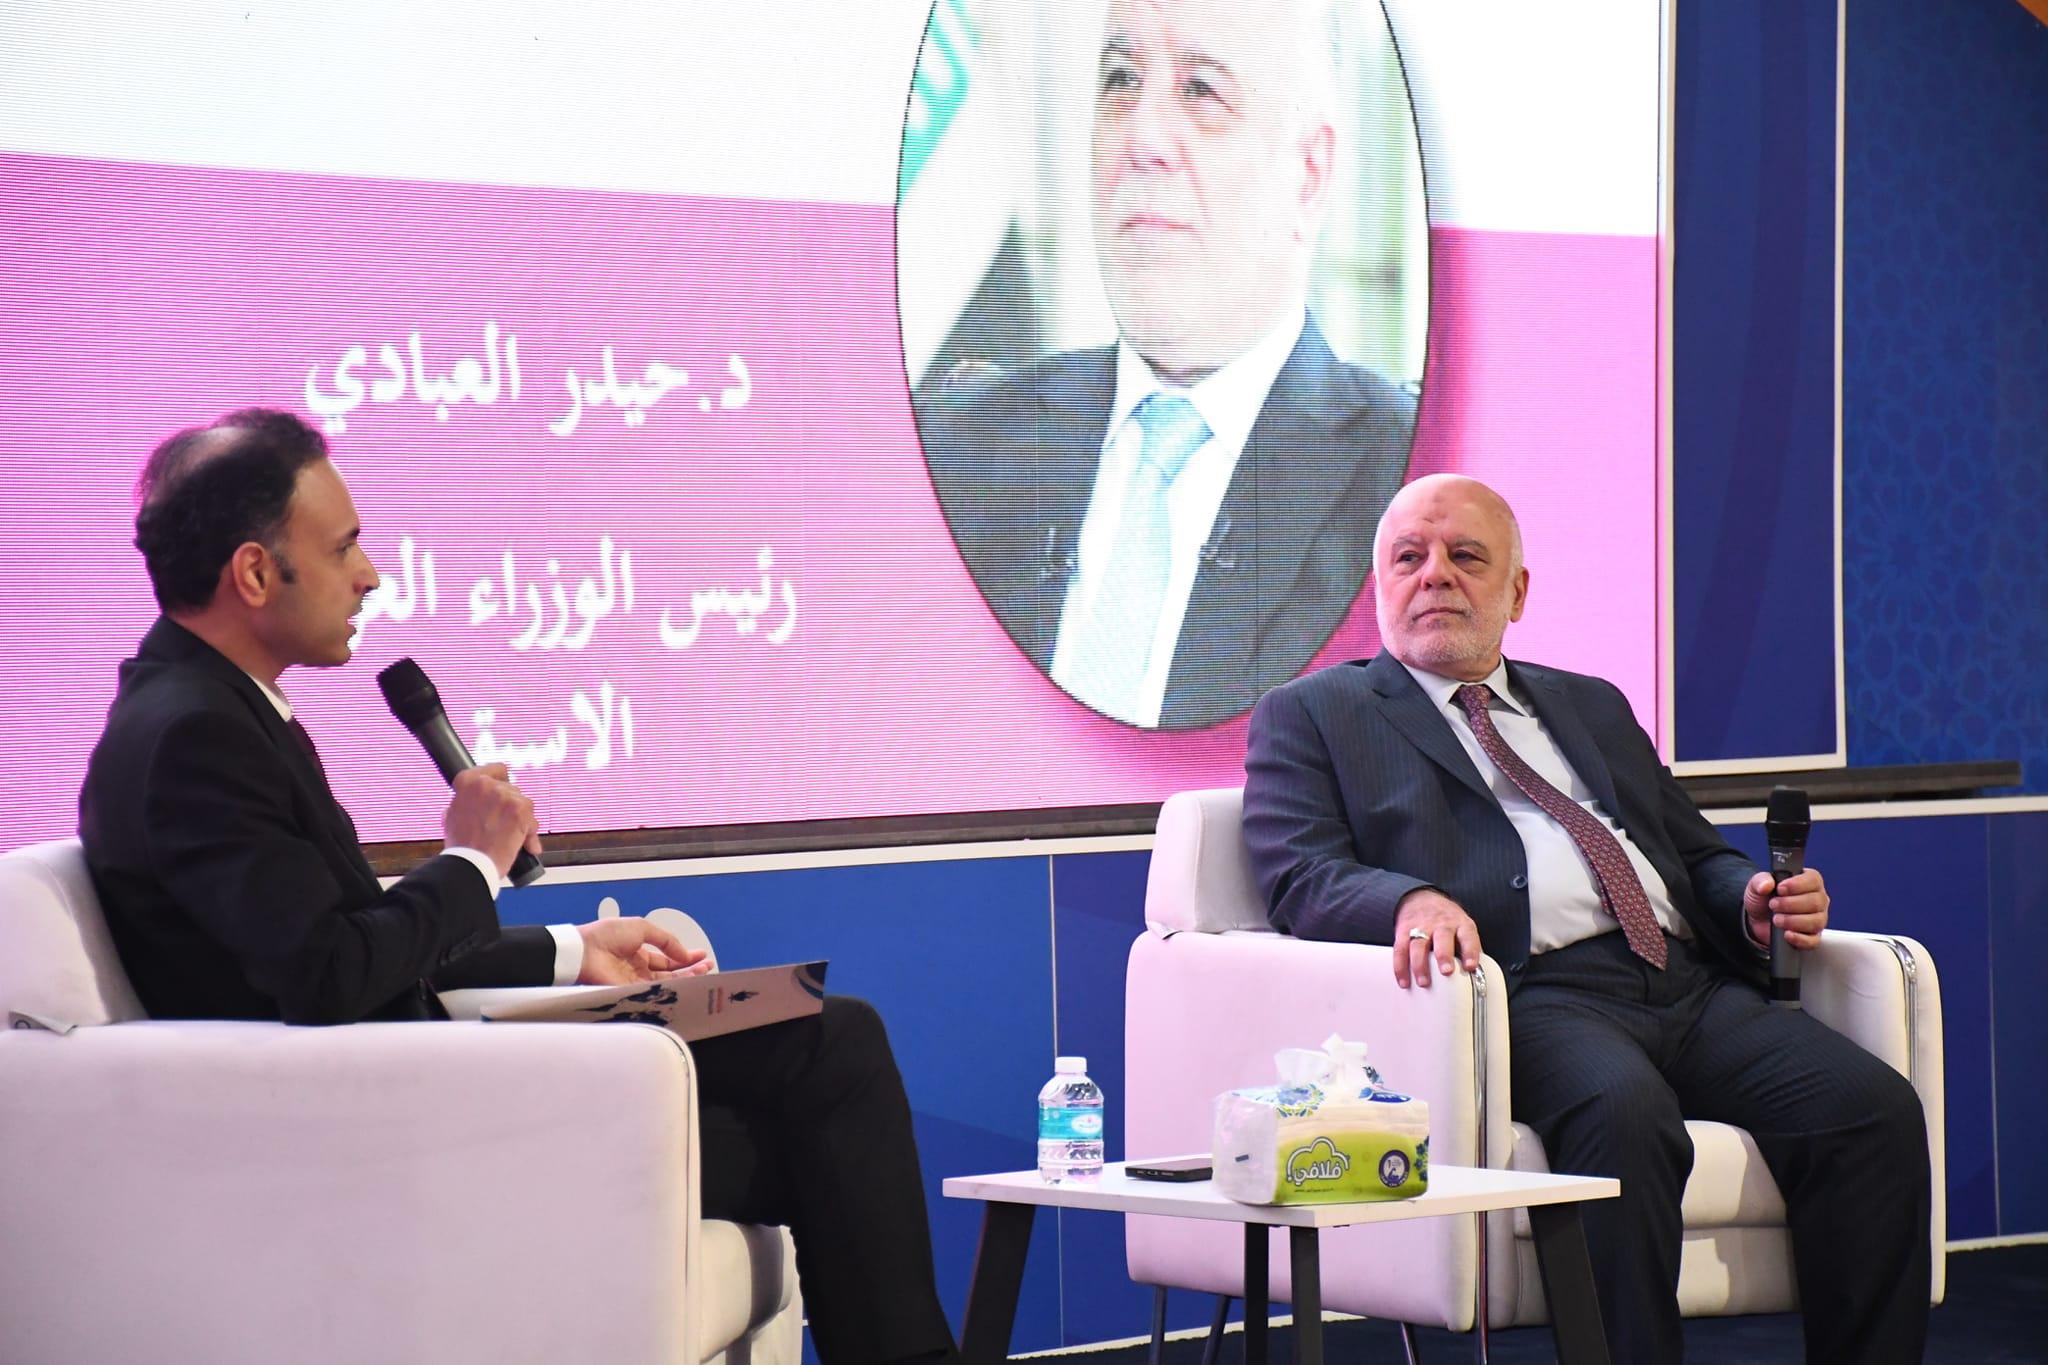 Dr. Al-Abadi: The decline in participation in elections weakens their legitimacy and opens the way for minority rule and majority discontent